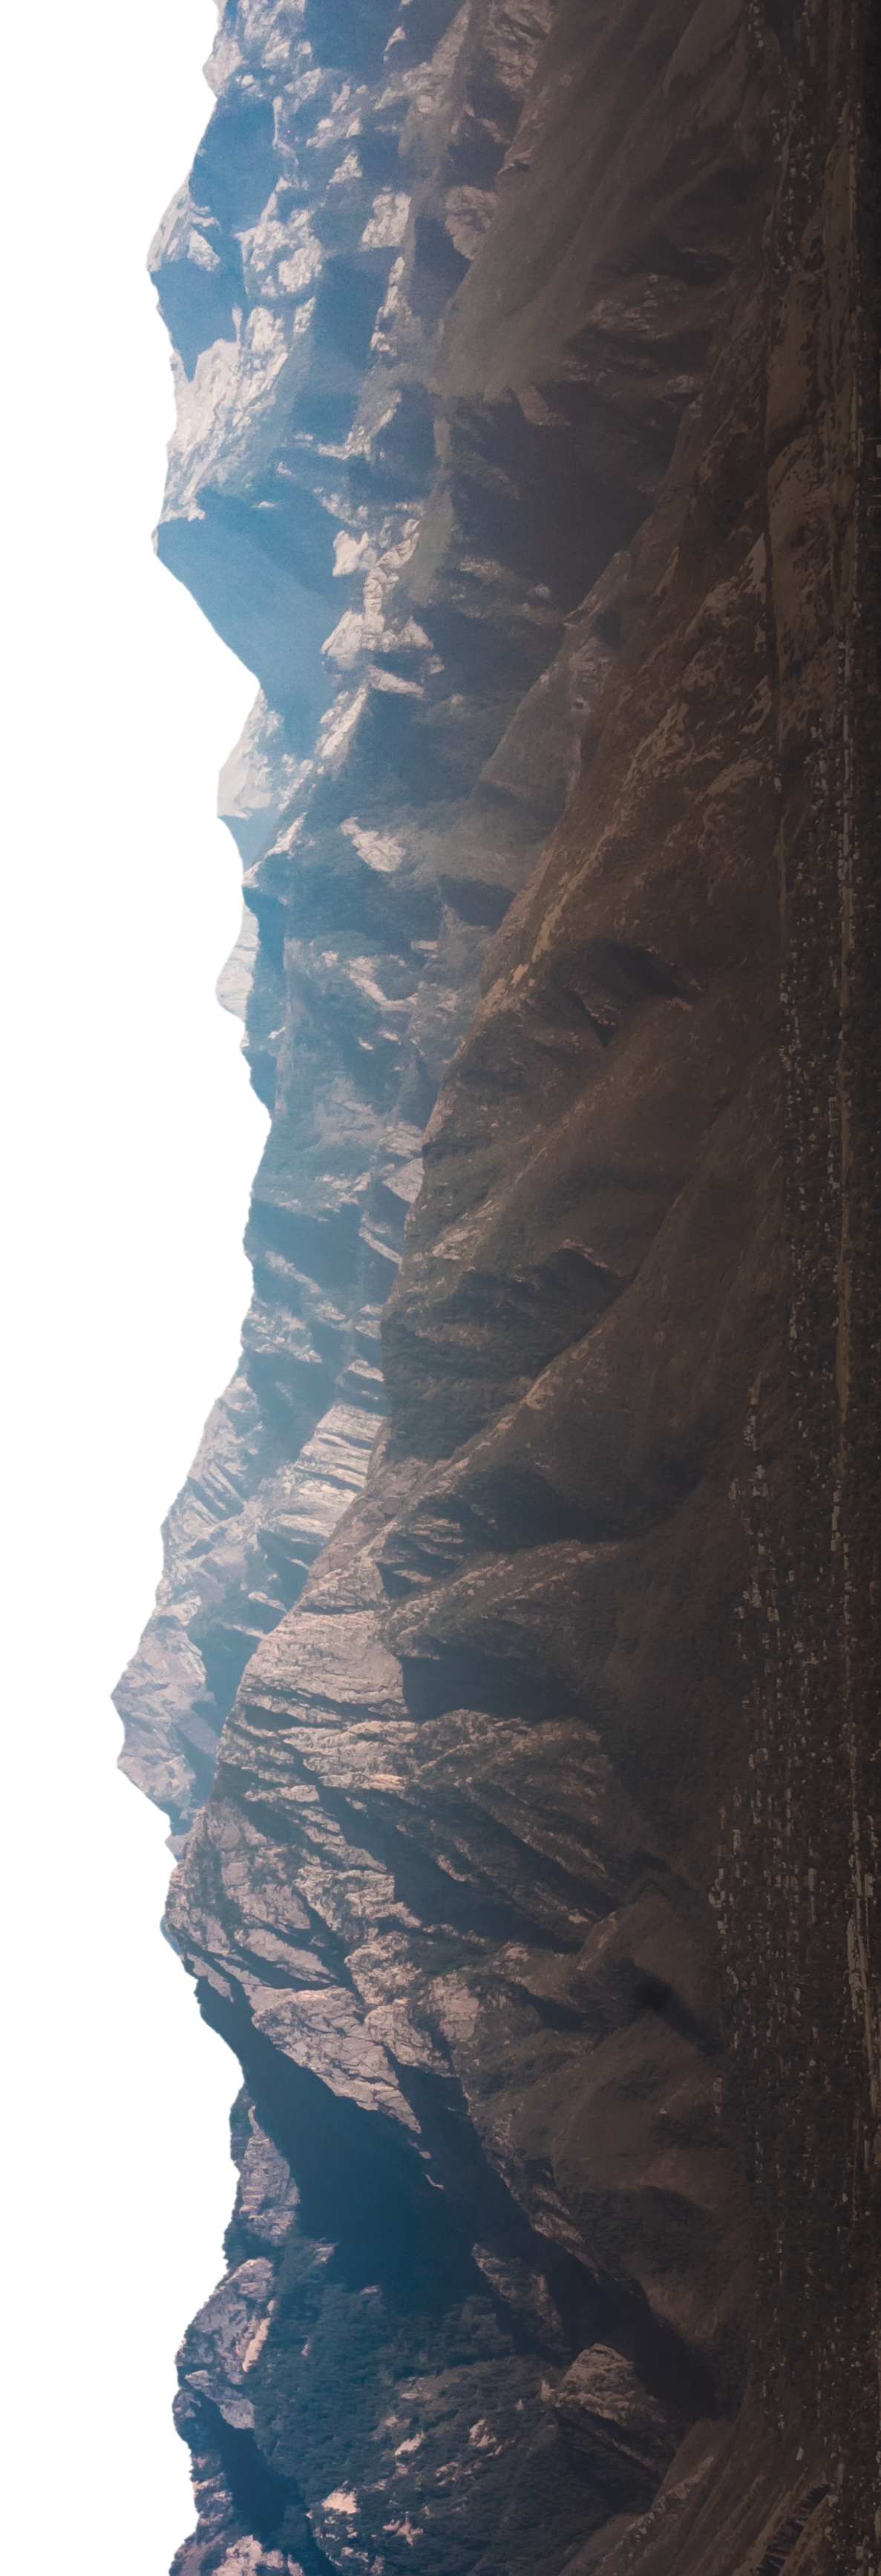 Mountains rotated to be vertical instead of horizontal